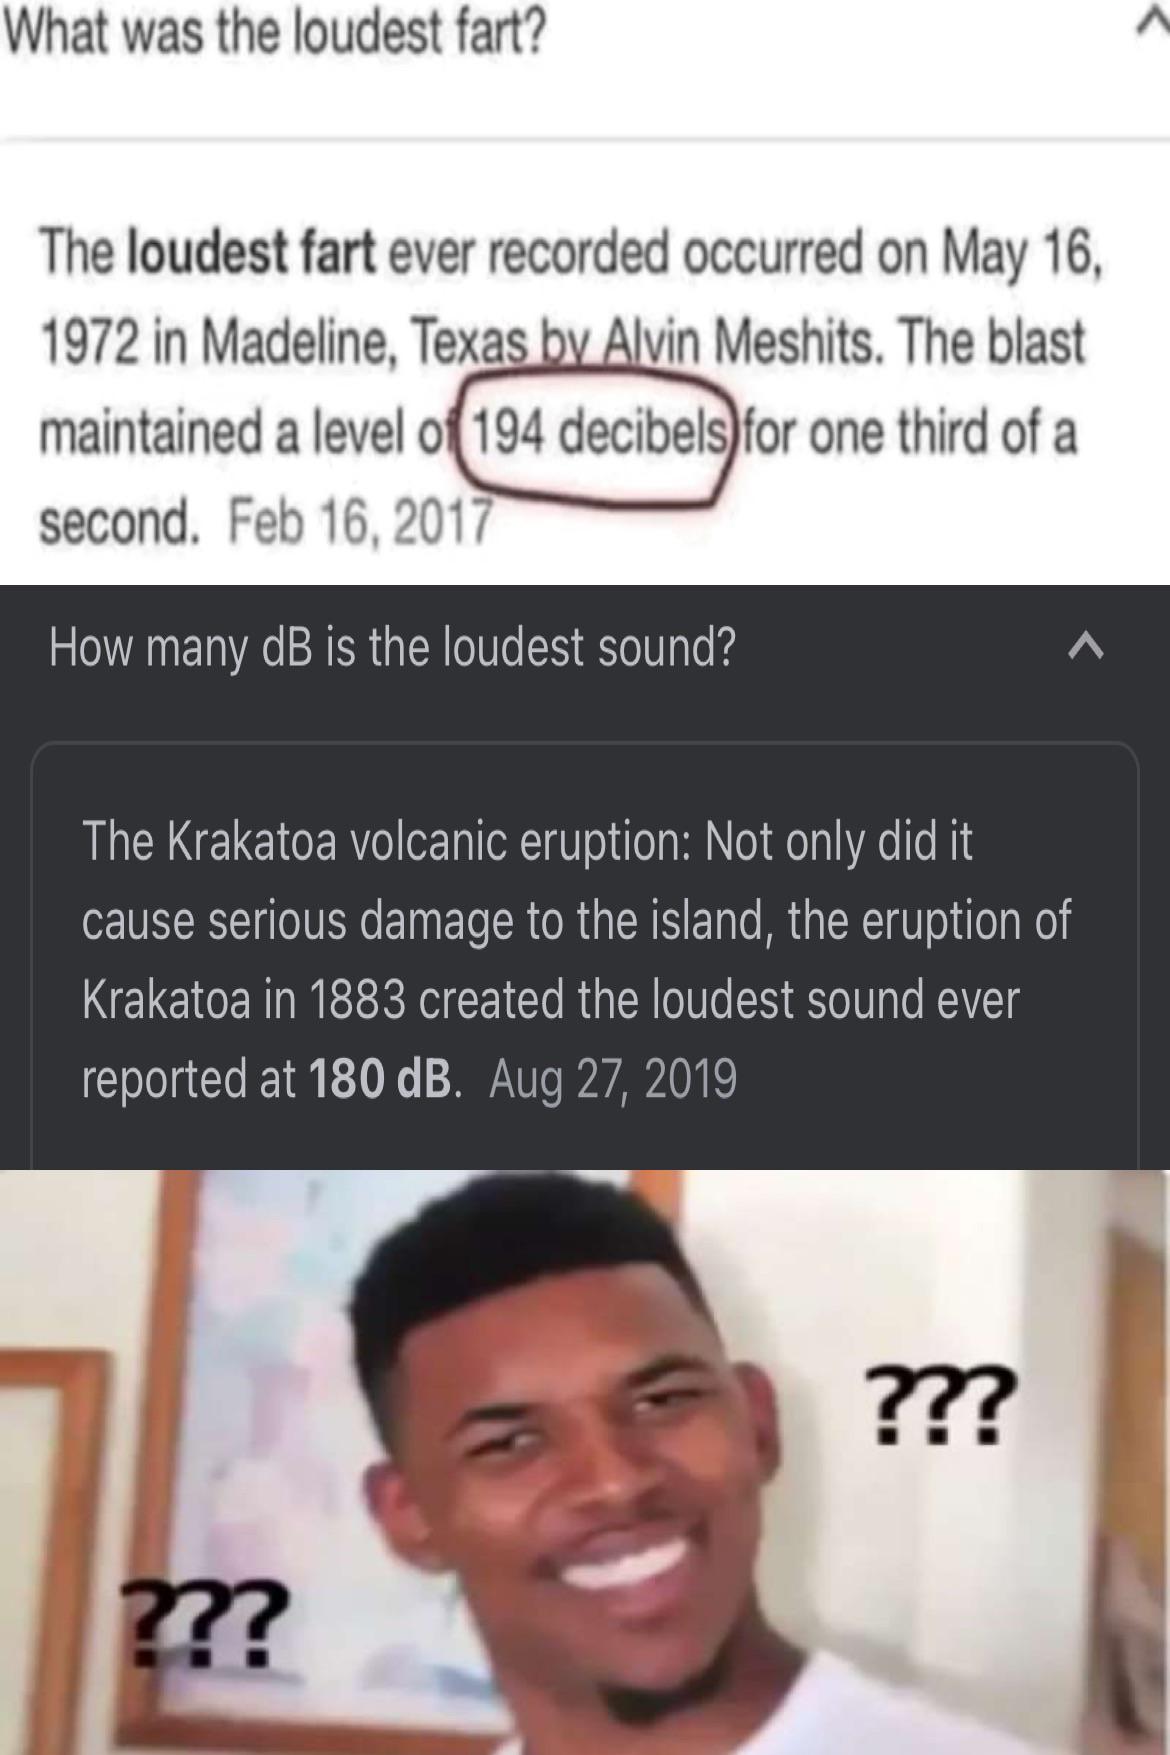 dank memes - funny memes - aromantic memes - What was the loudest fart? The loudest fart ever recorded occurred on in Madeline, Texas by Alvin Meshits. The blast maintained a level of 194 decibelsfor one third of a second. How many dB is the loudest sound